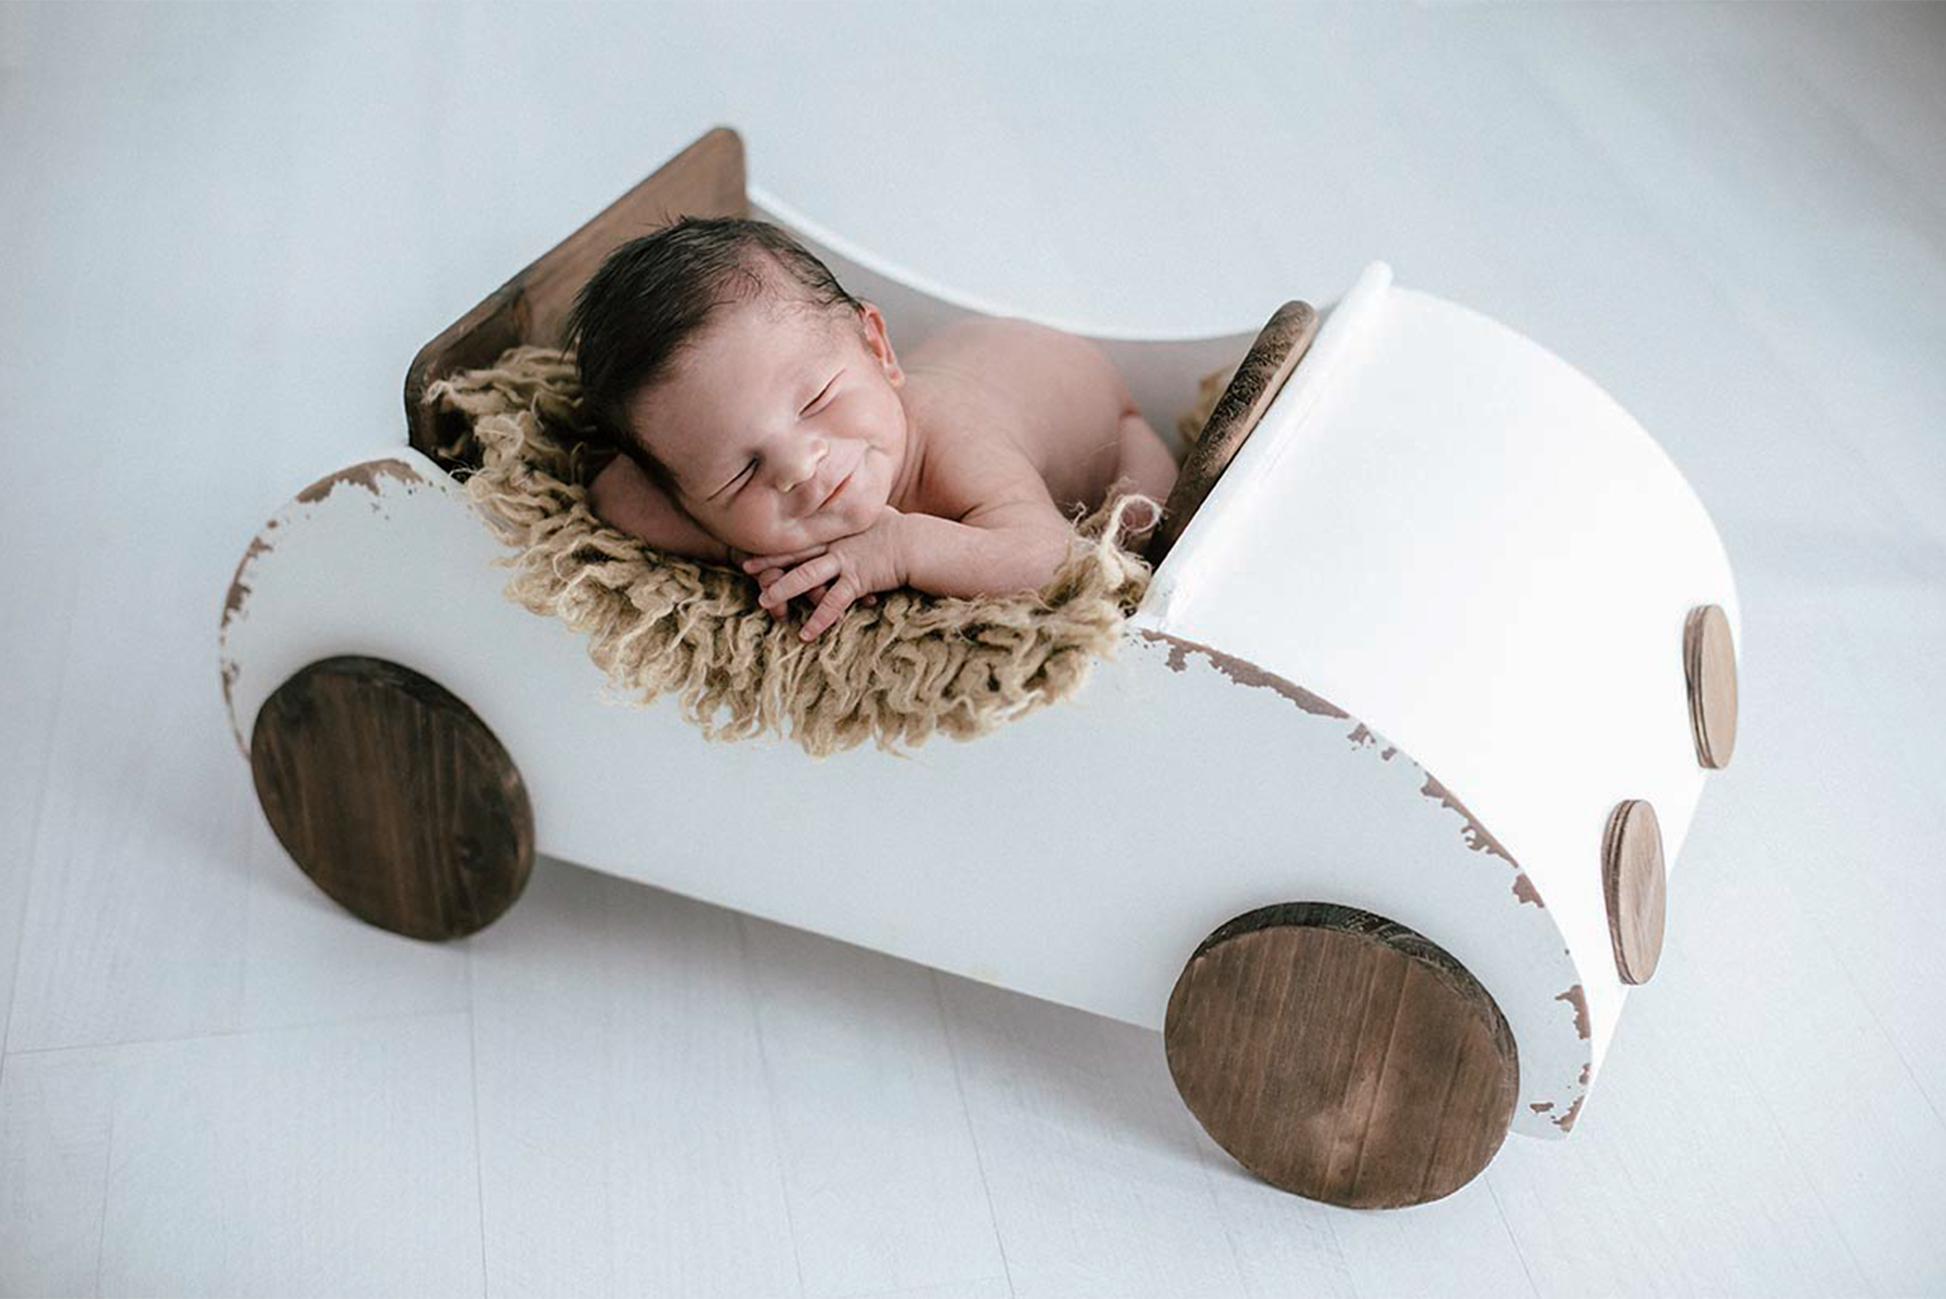 White Rustic Wooden Convertible Car for Newborn Photography by Newborn Studio Props